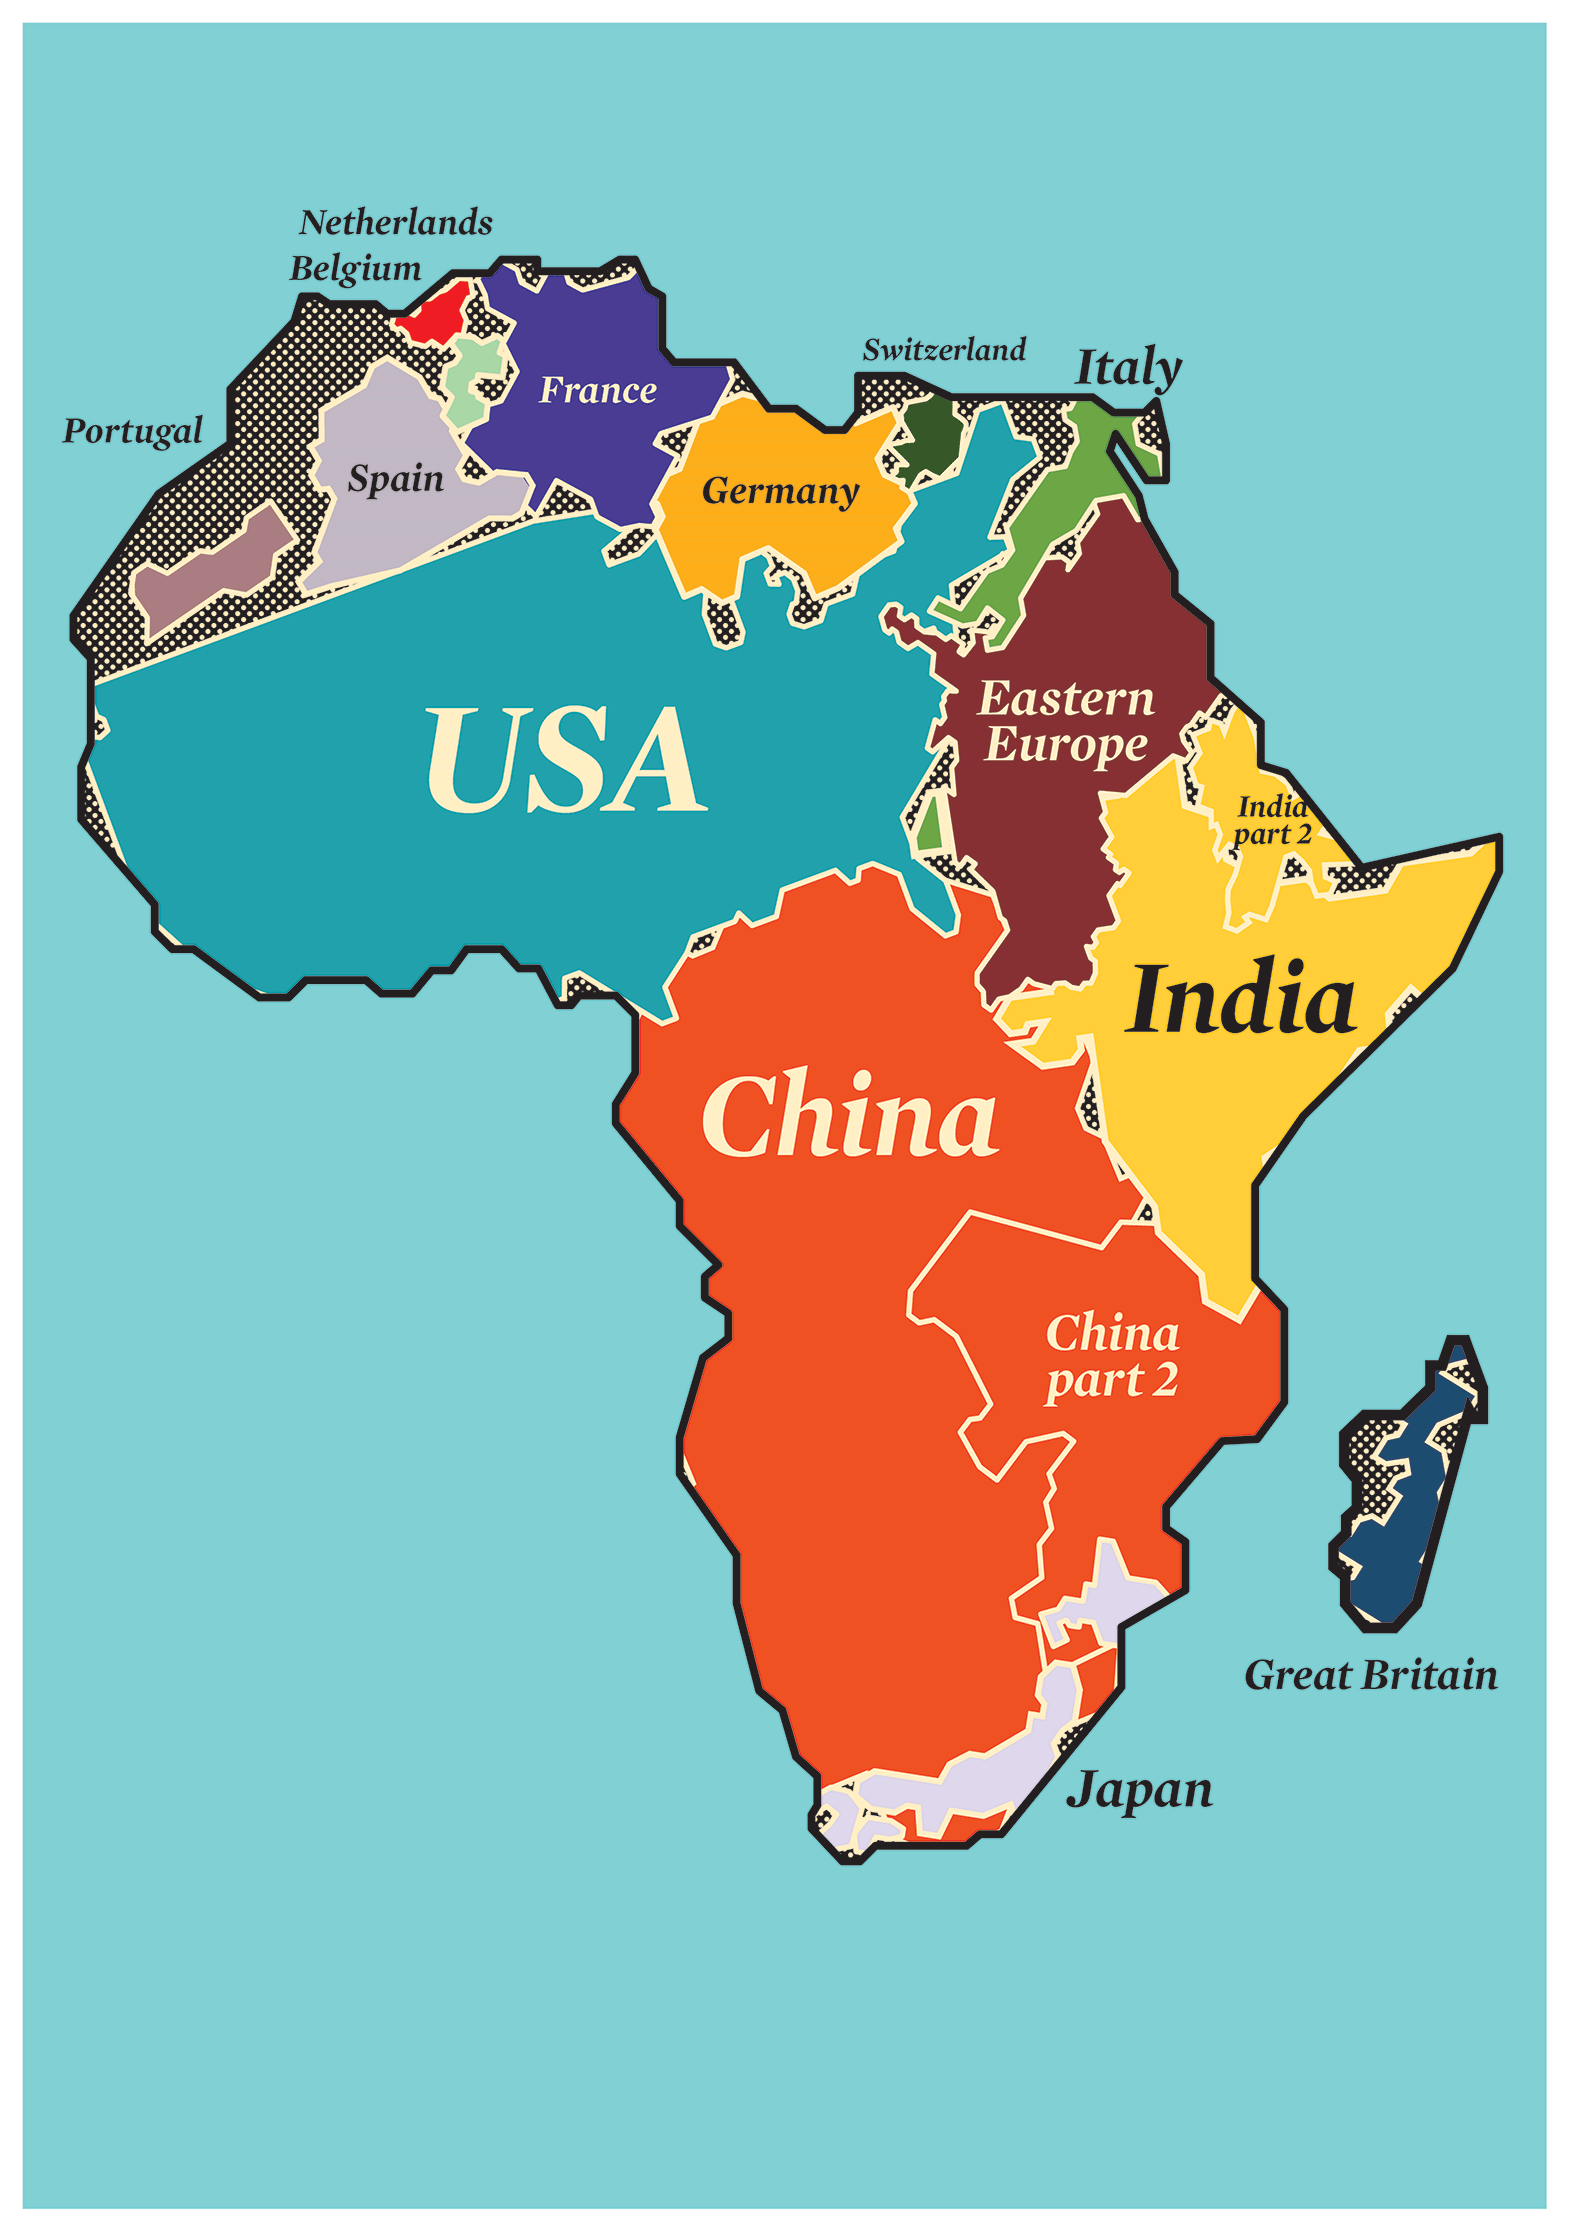 Visualizing the Size of Africa